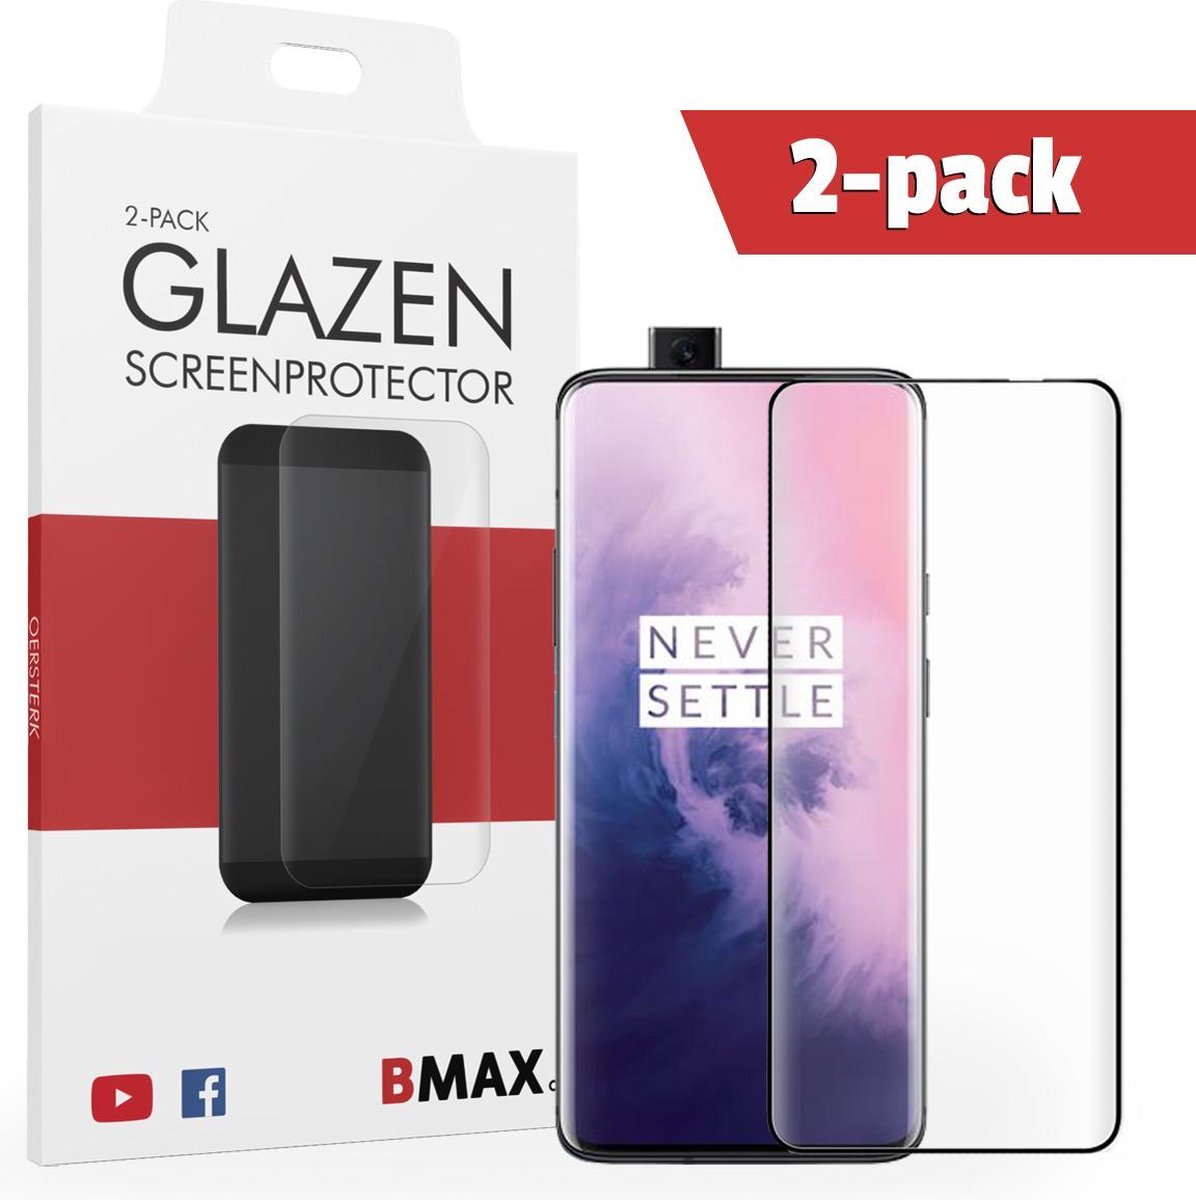 2-pack Bmax Oneplus 7 Pro Screenprotector - Glass - Full Cover 5d - Black